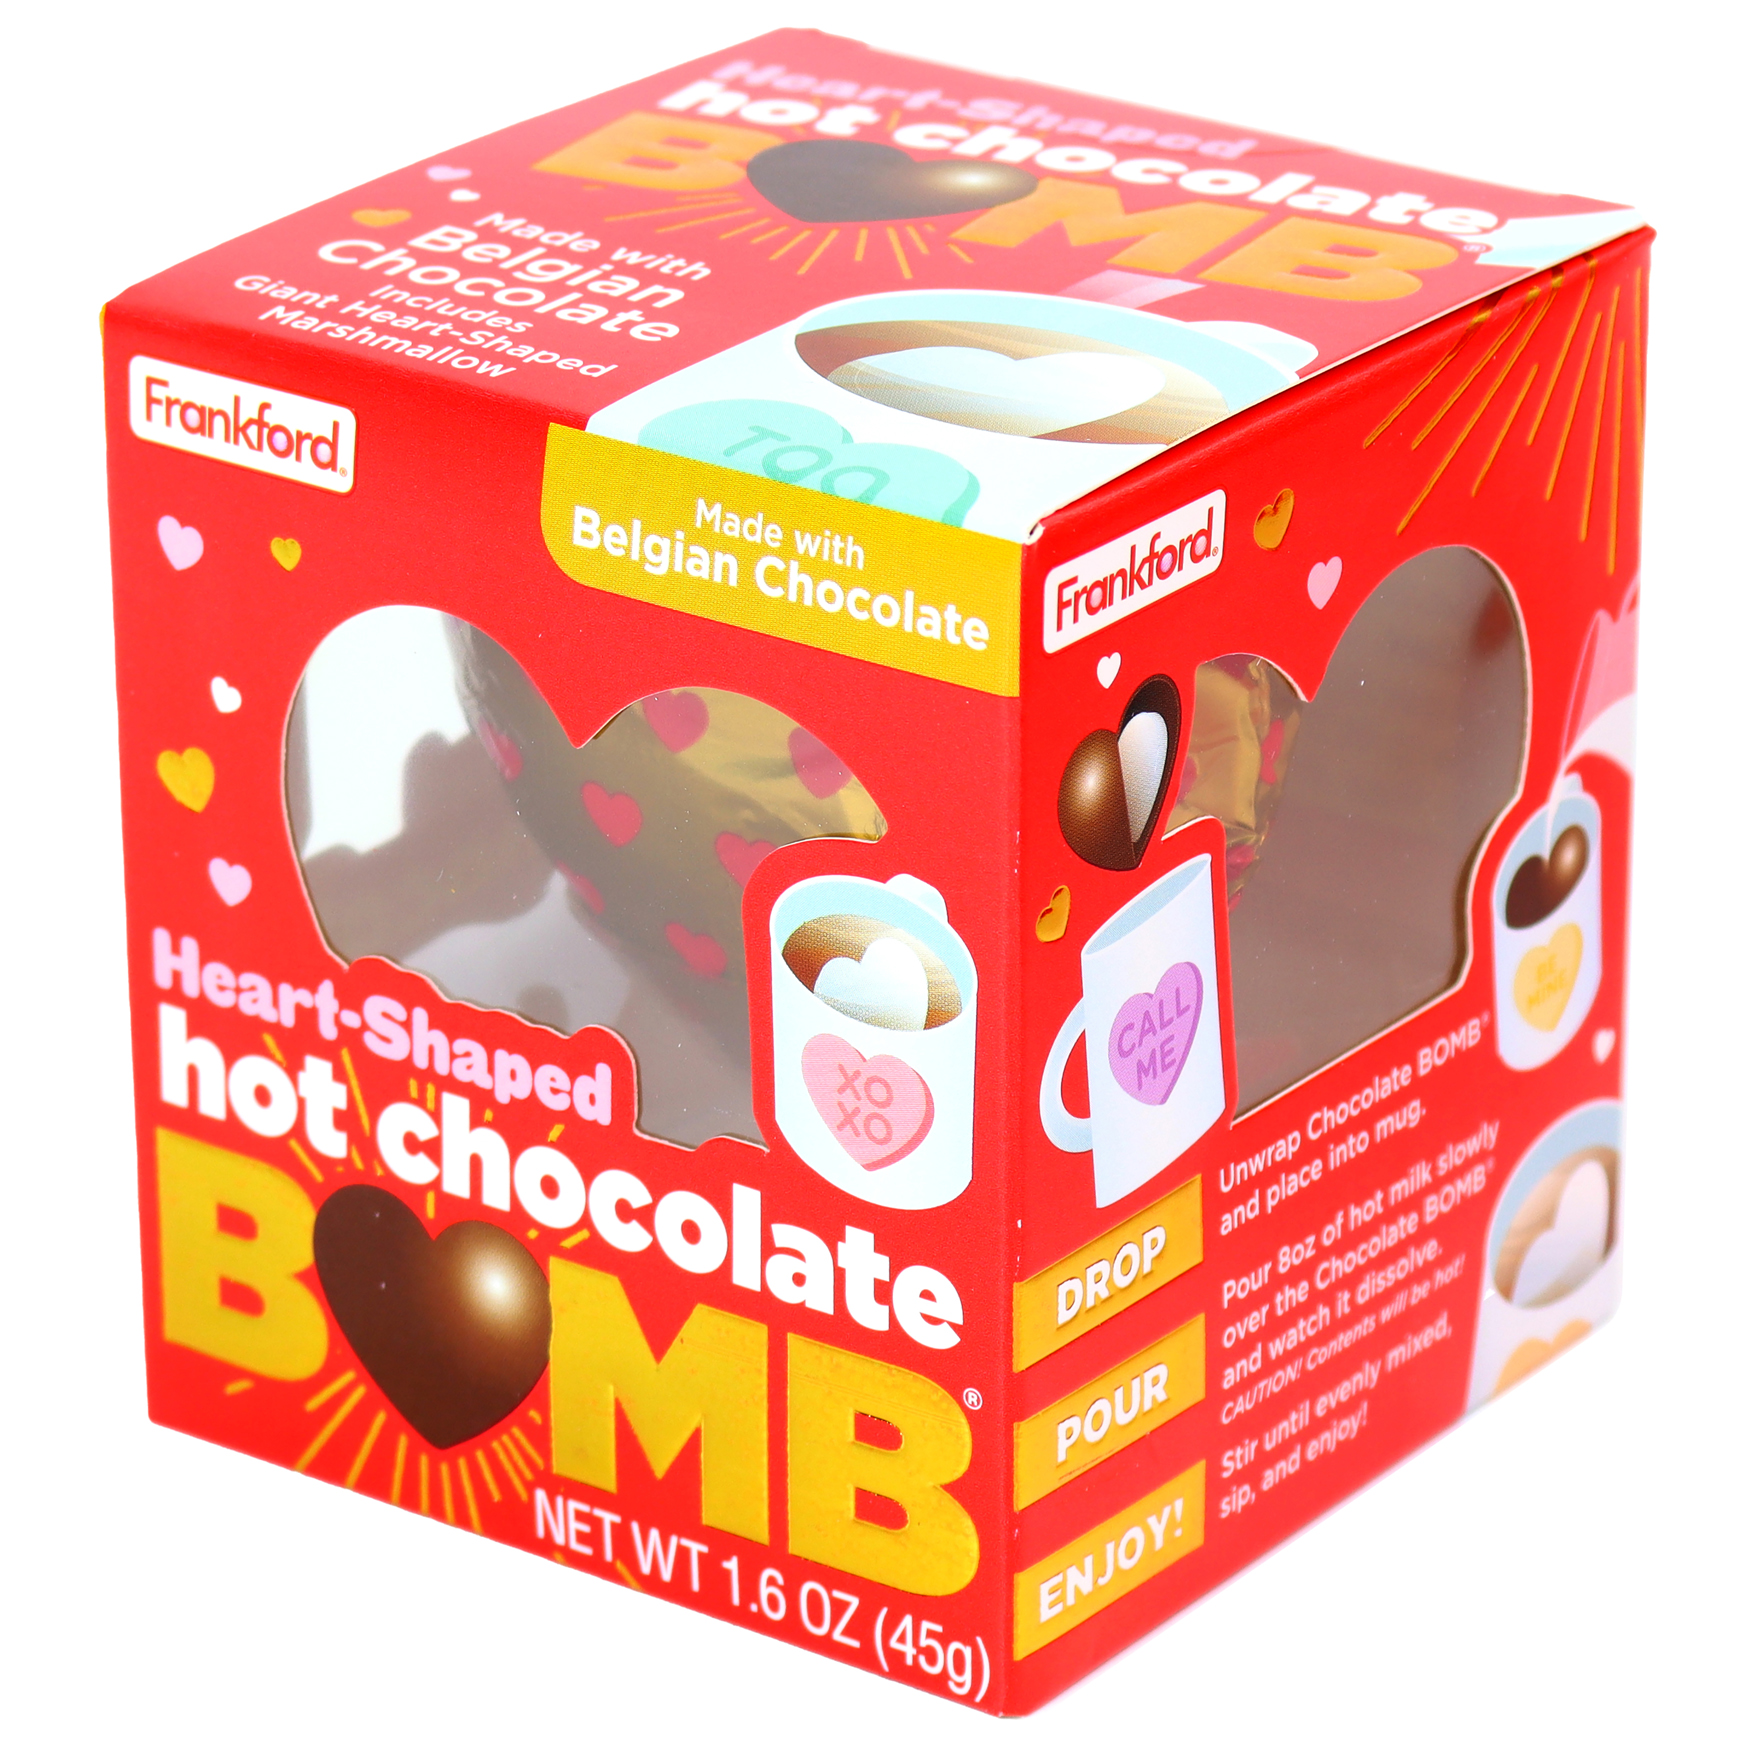 Frankford Valentine's Day Heart Milk Chocolate Bomb 1.6oz, 1 Count - image 3 of 7